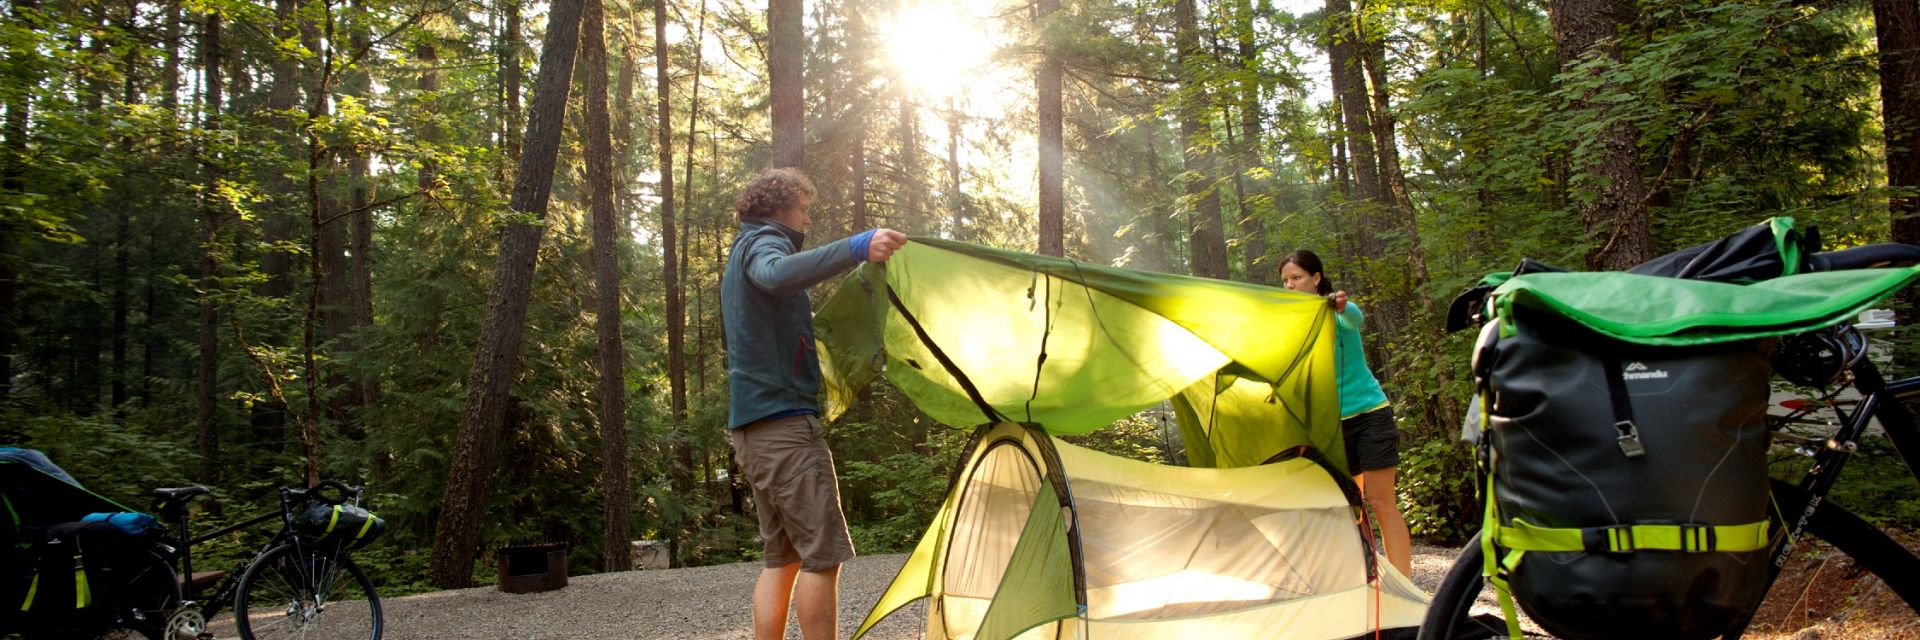 Couple setting up their tent at a campsite in Nairn Falls Provincial Park.